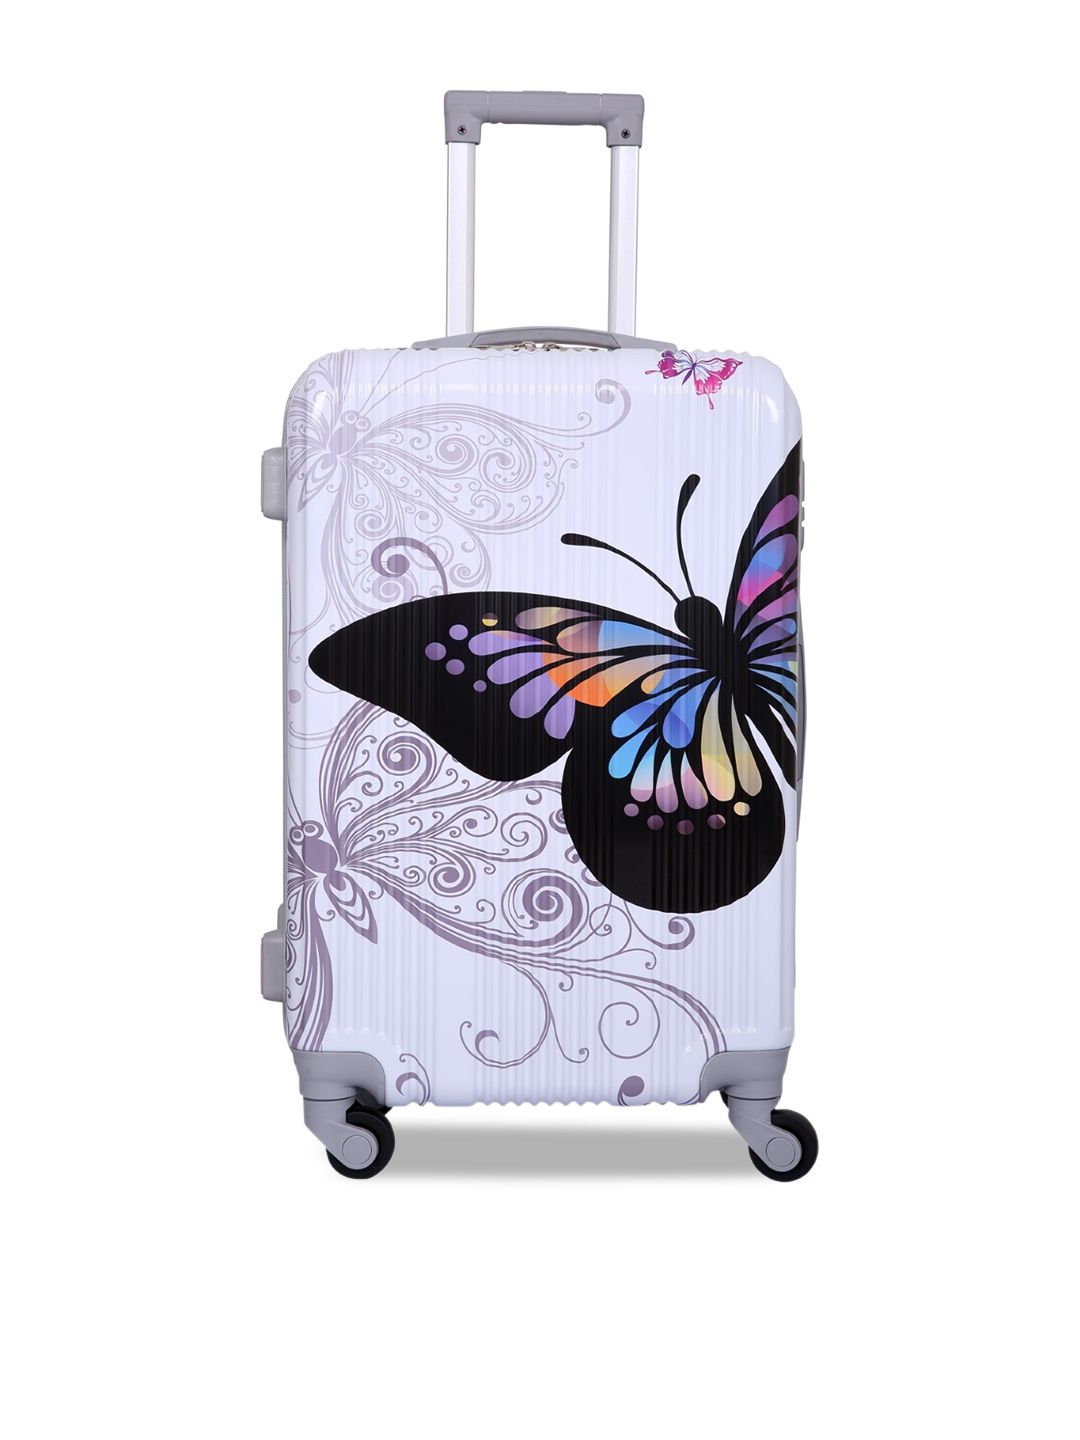 Polo Class White & Lavender Printed Cabin Suitcase Trolley Bag Price in India